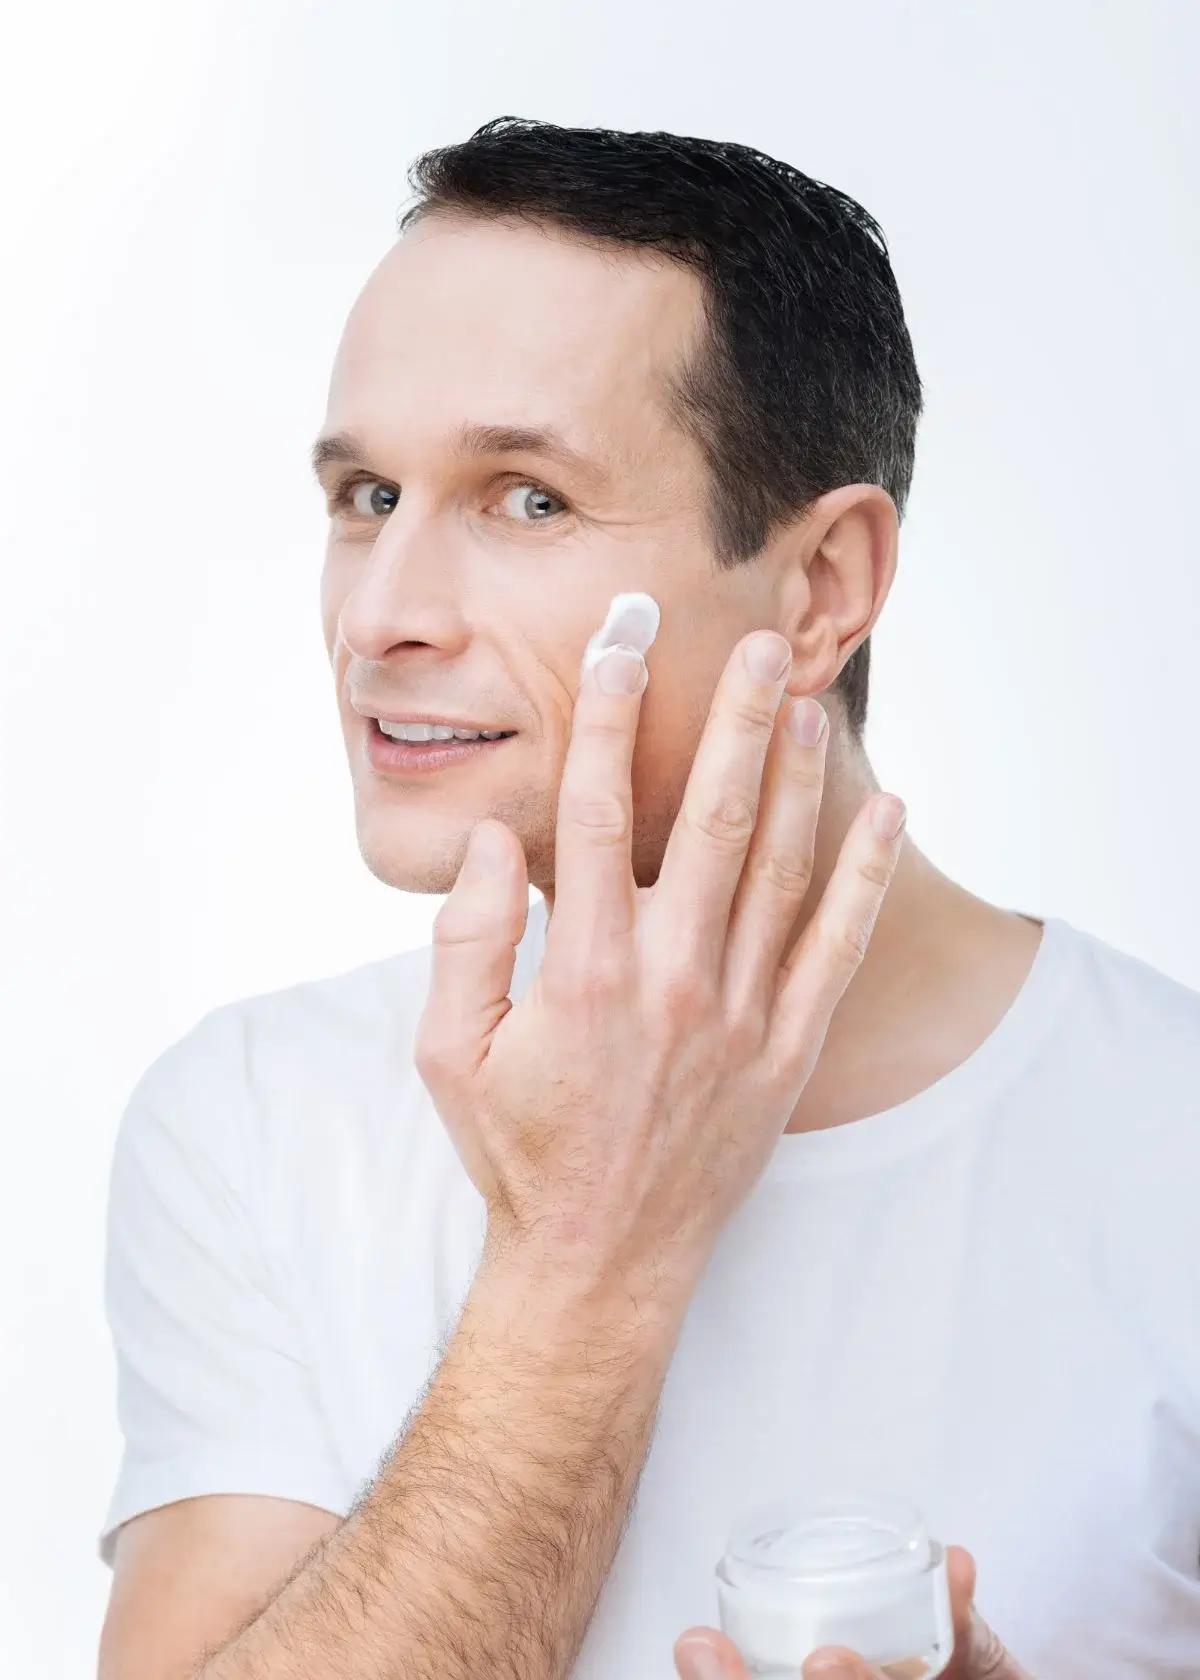 How to Choose the right face moisturizer for Men?